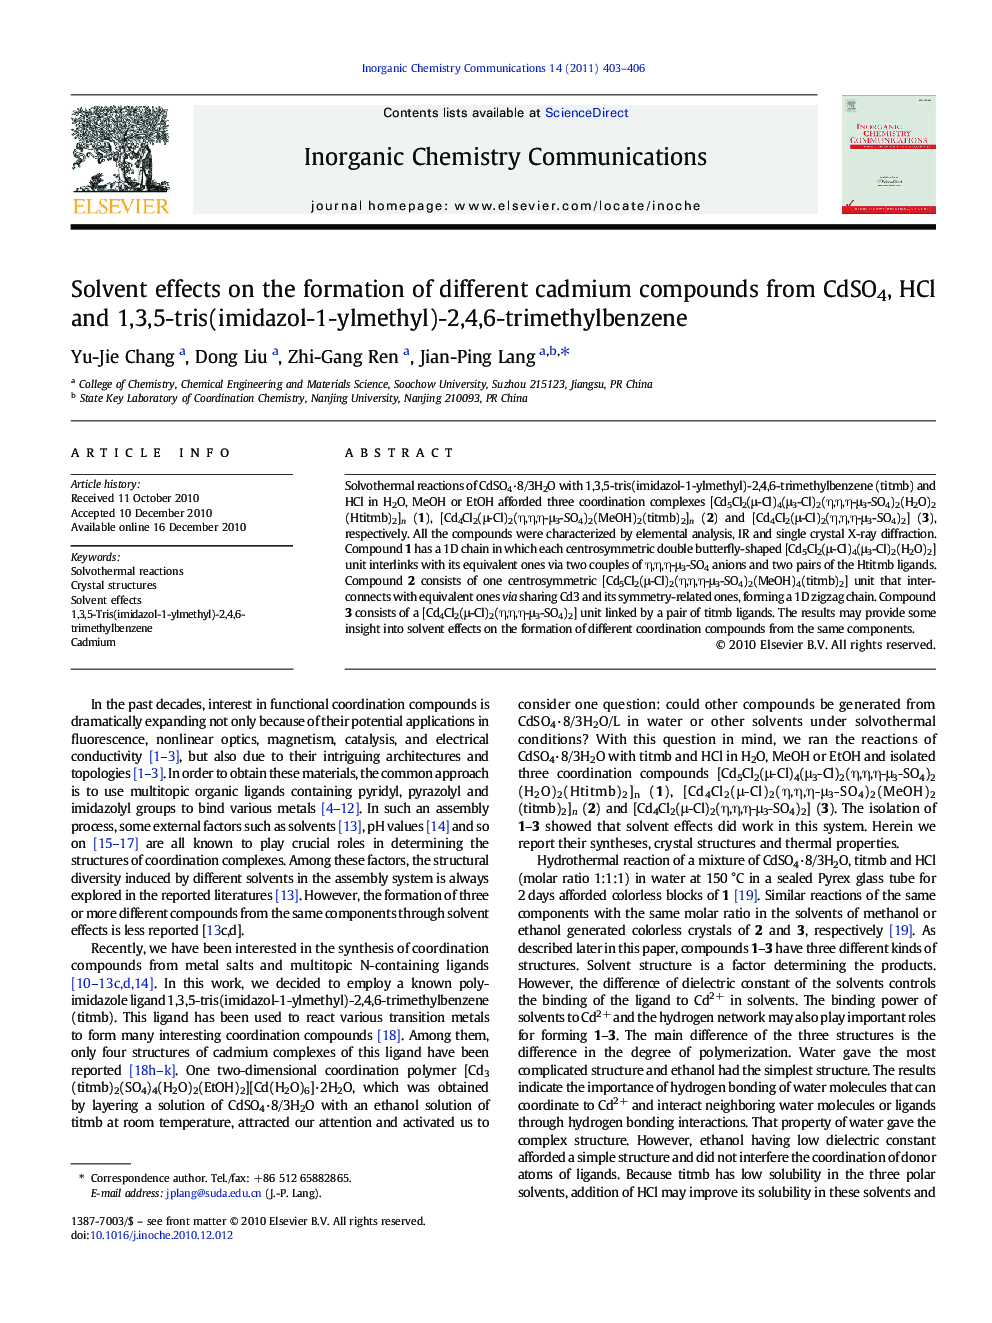 Solvent effects on the formation of different cadmium compounds from CdSO4, HCl and 1,3,5-tris(imidazol-1-ylmethyl)-2,4,6-trimethylbenzene